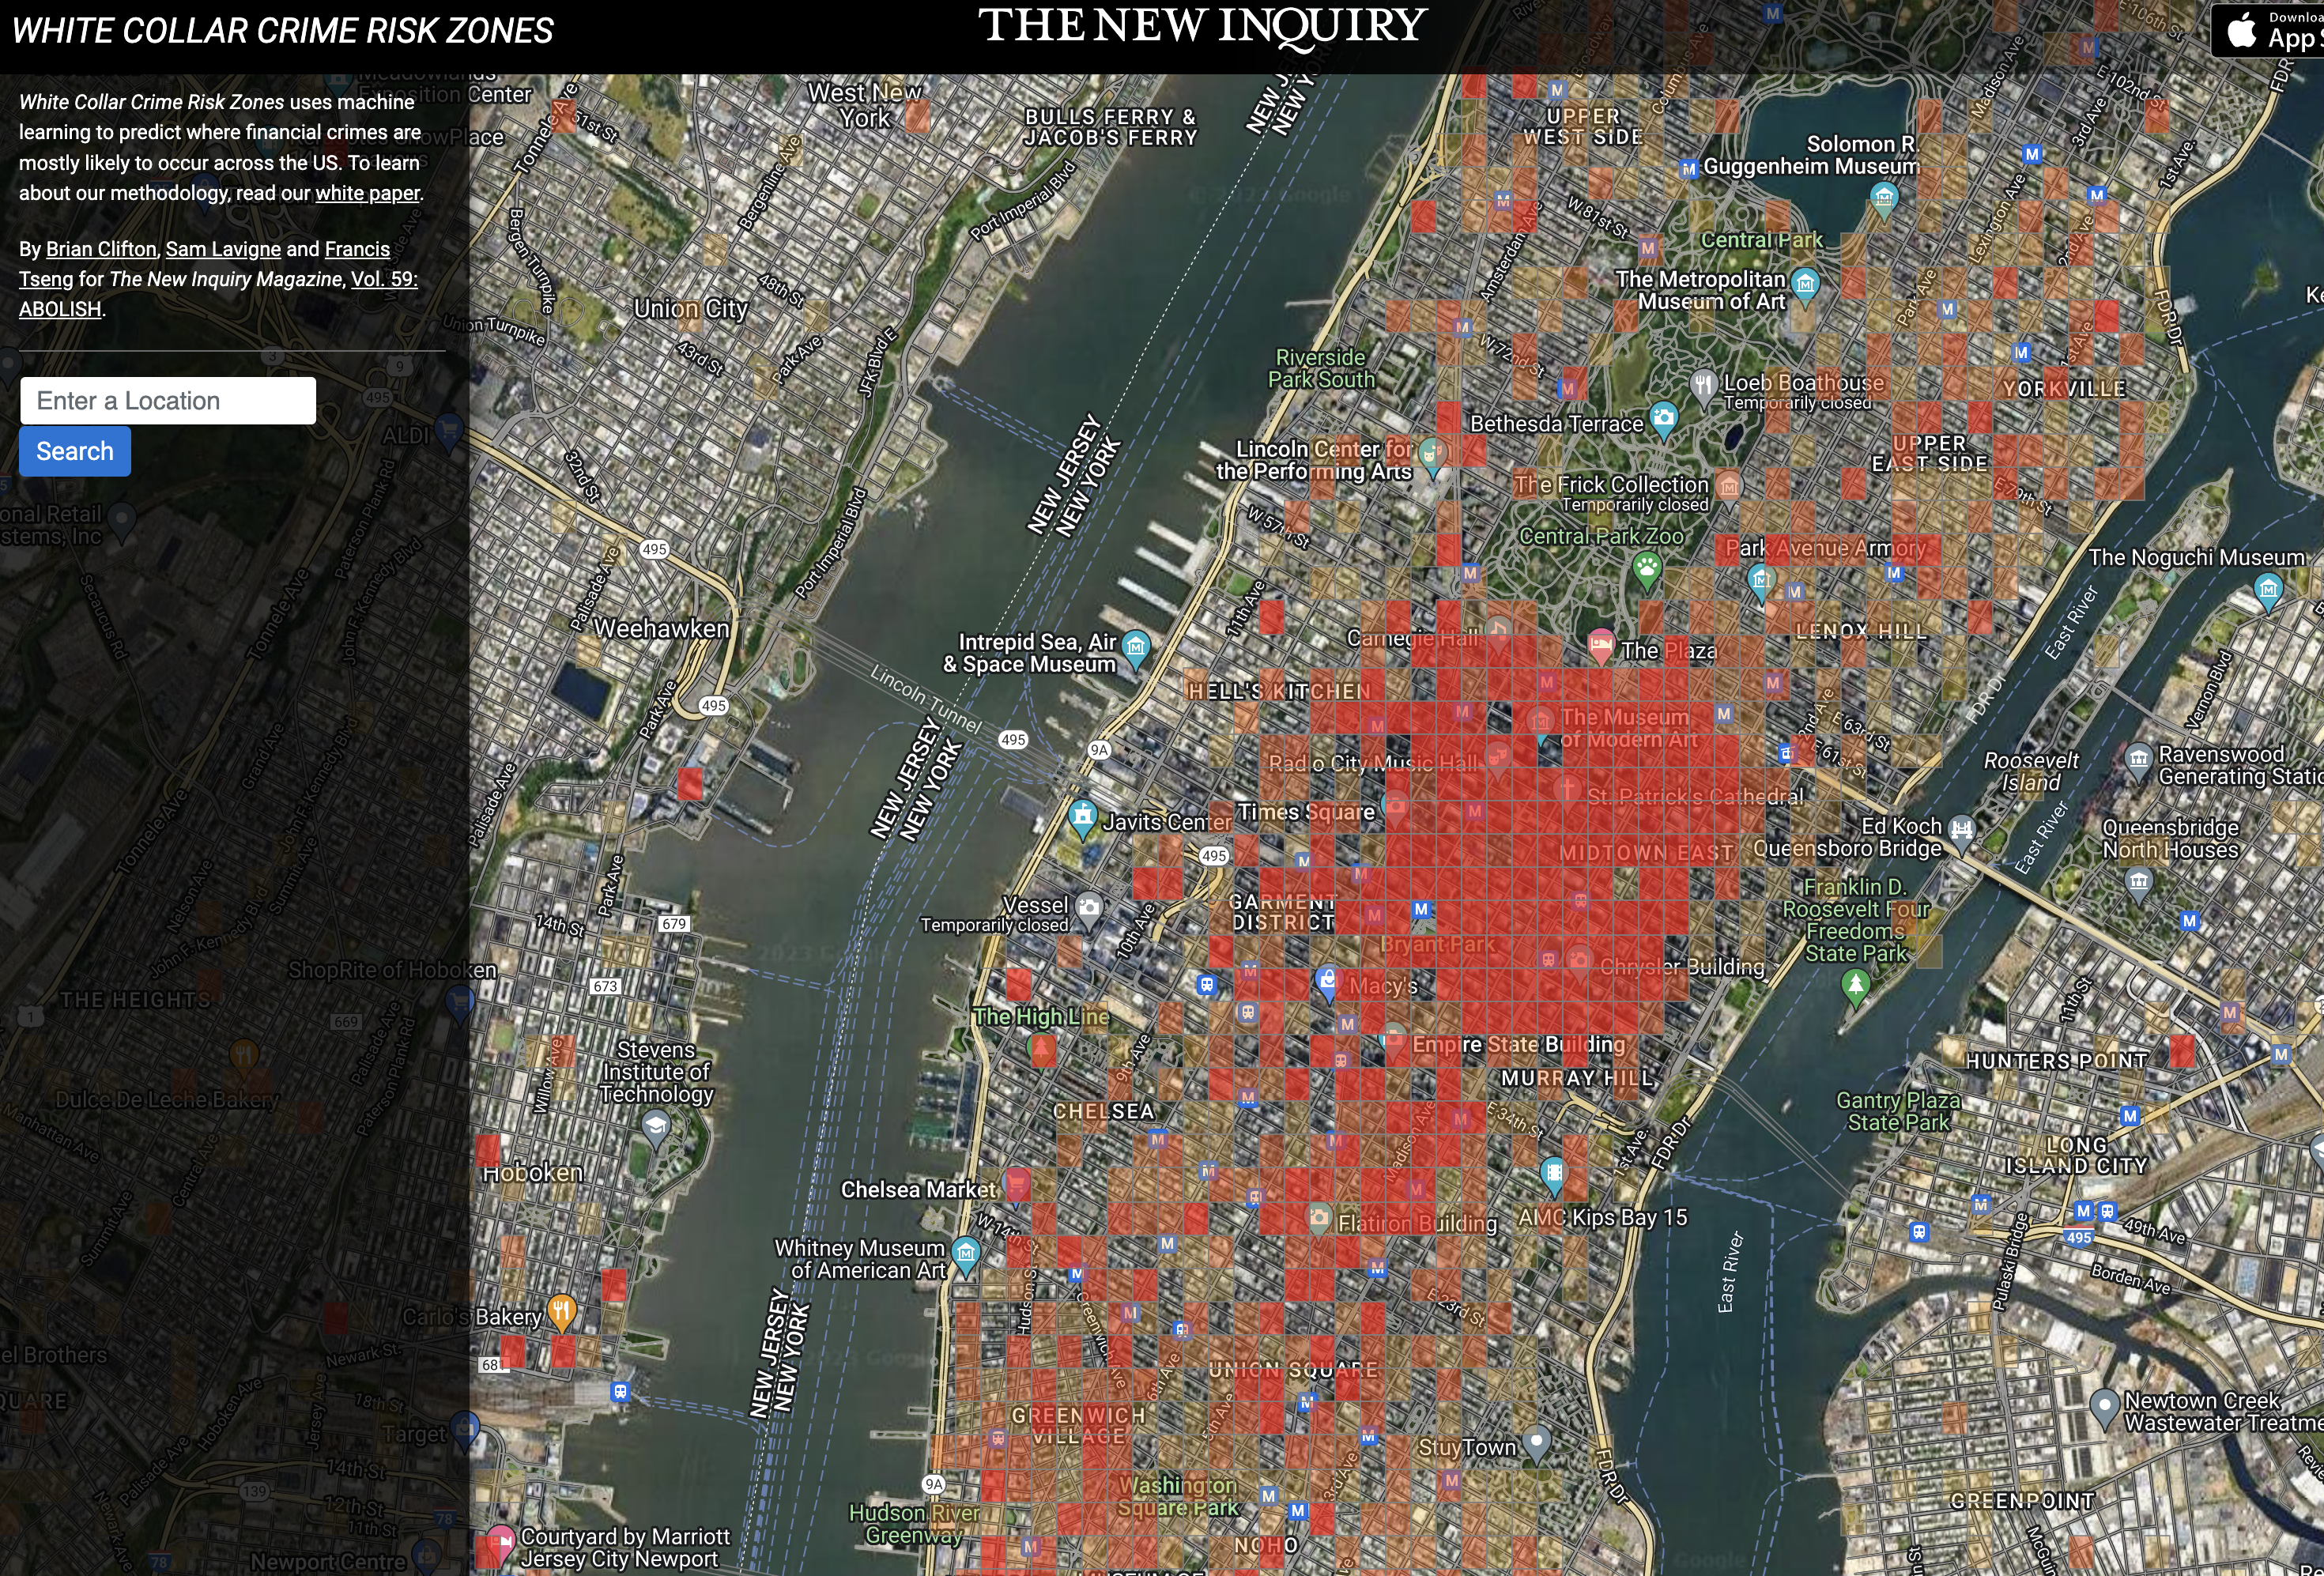 A map showing a heat map of white collar crime in NYC